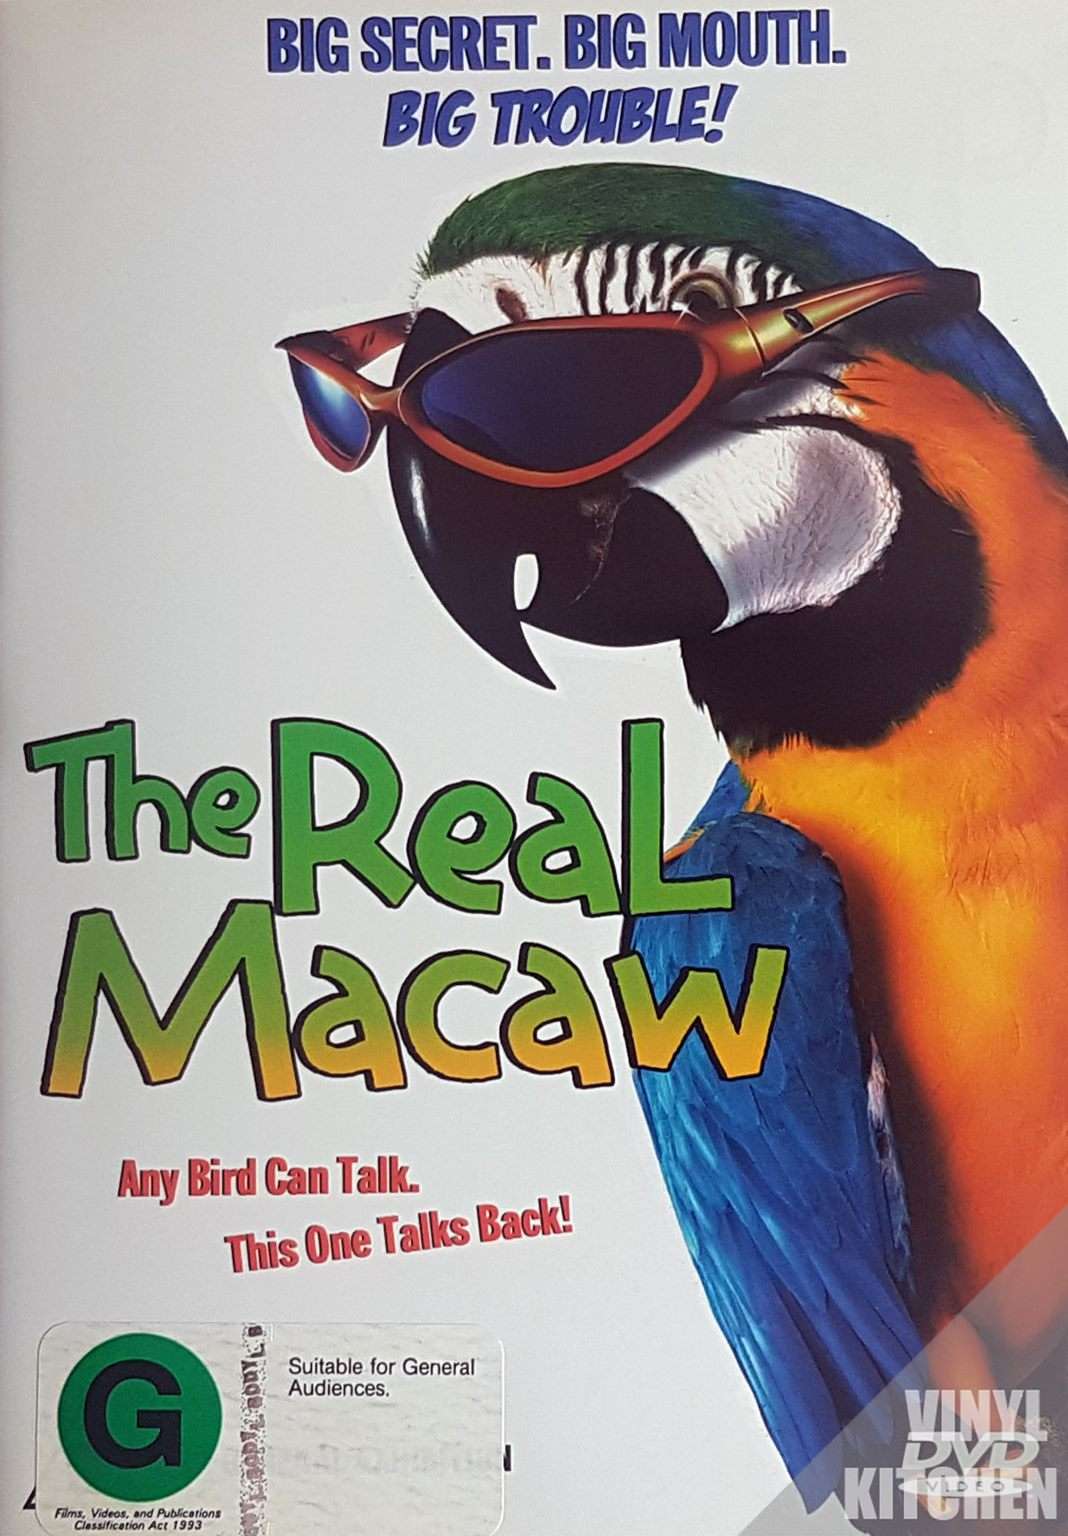 Real Macaw, The